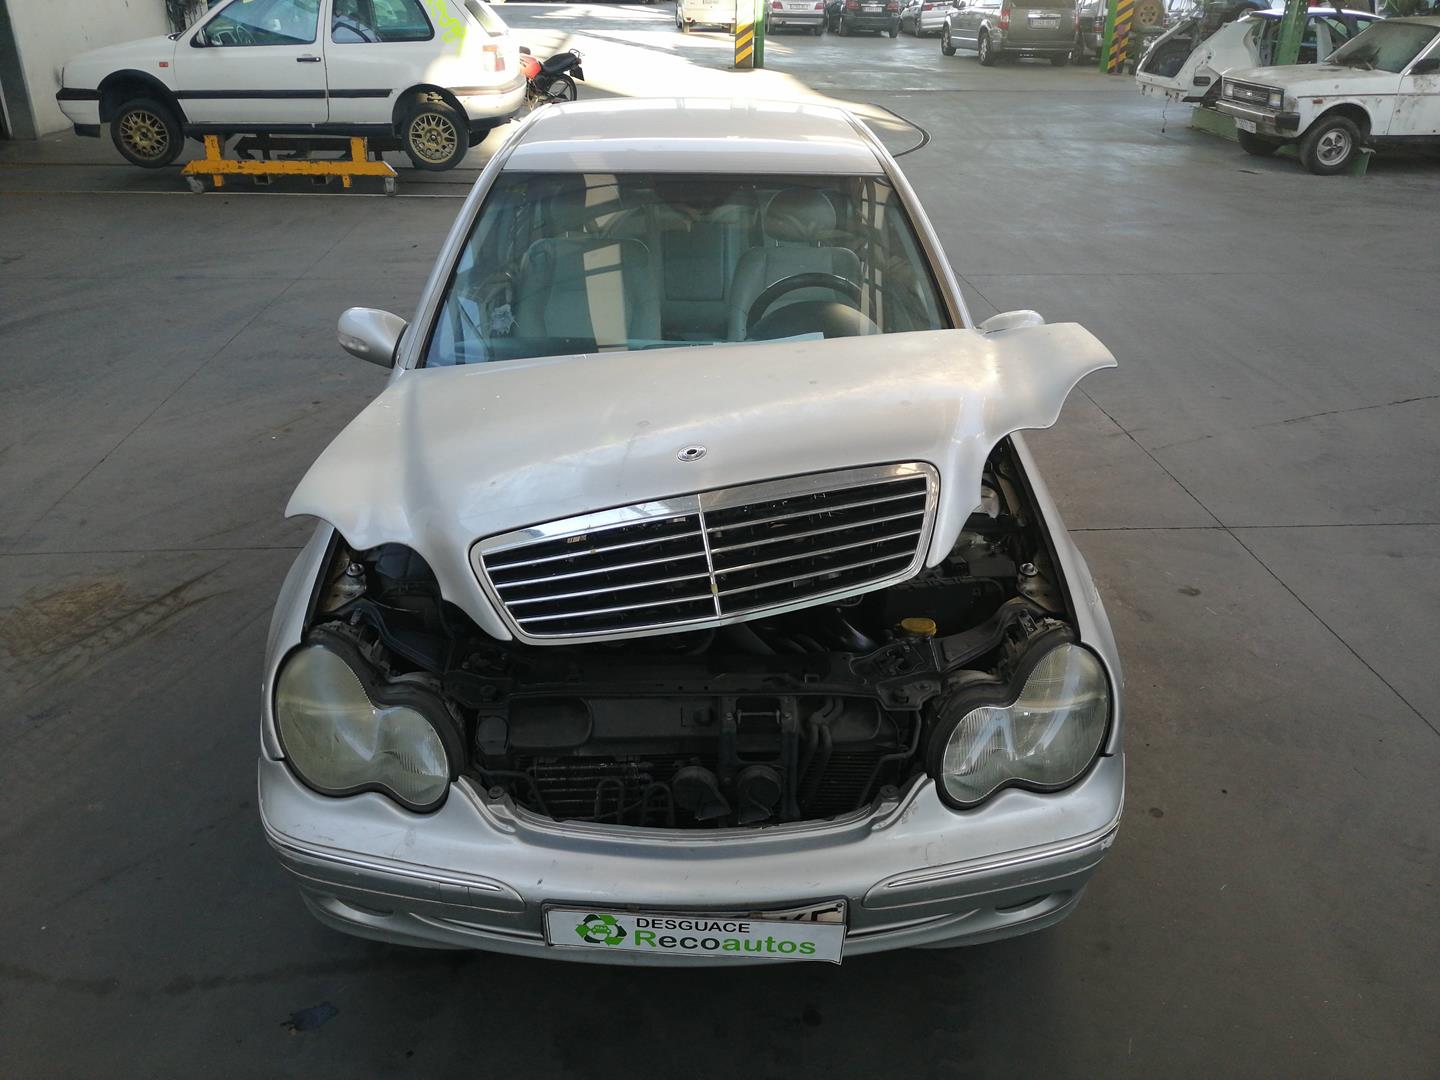 MERCEDES-BENZ C-Class W203/S203/CL203 (2000-2008) Other Control Units 2038206326 21728819